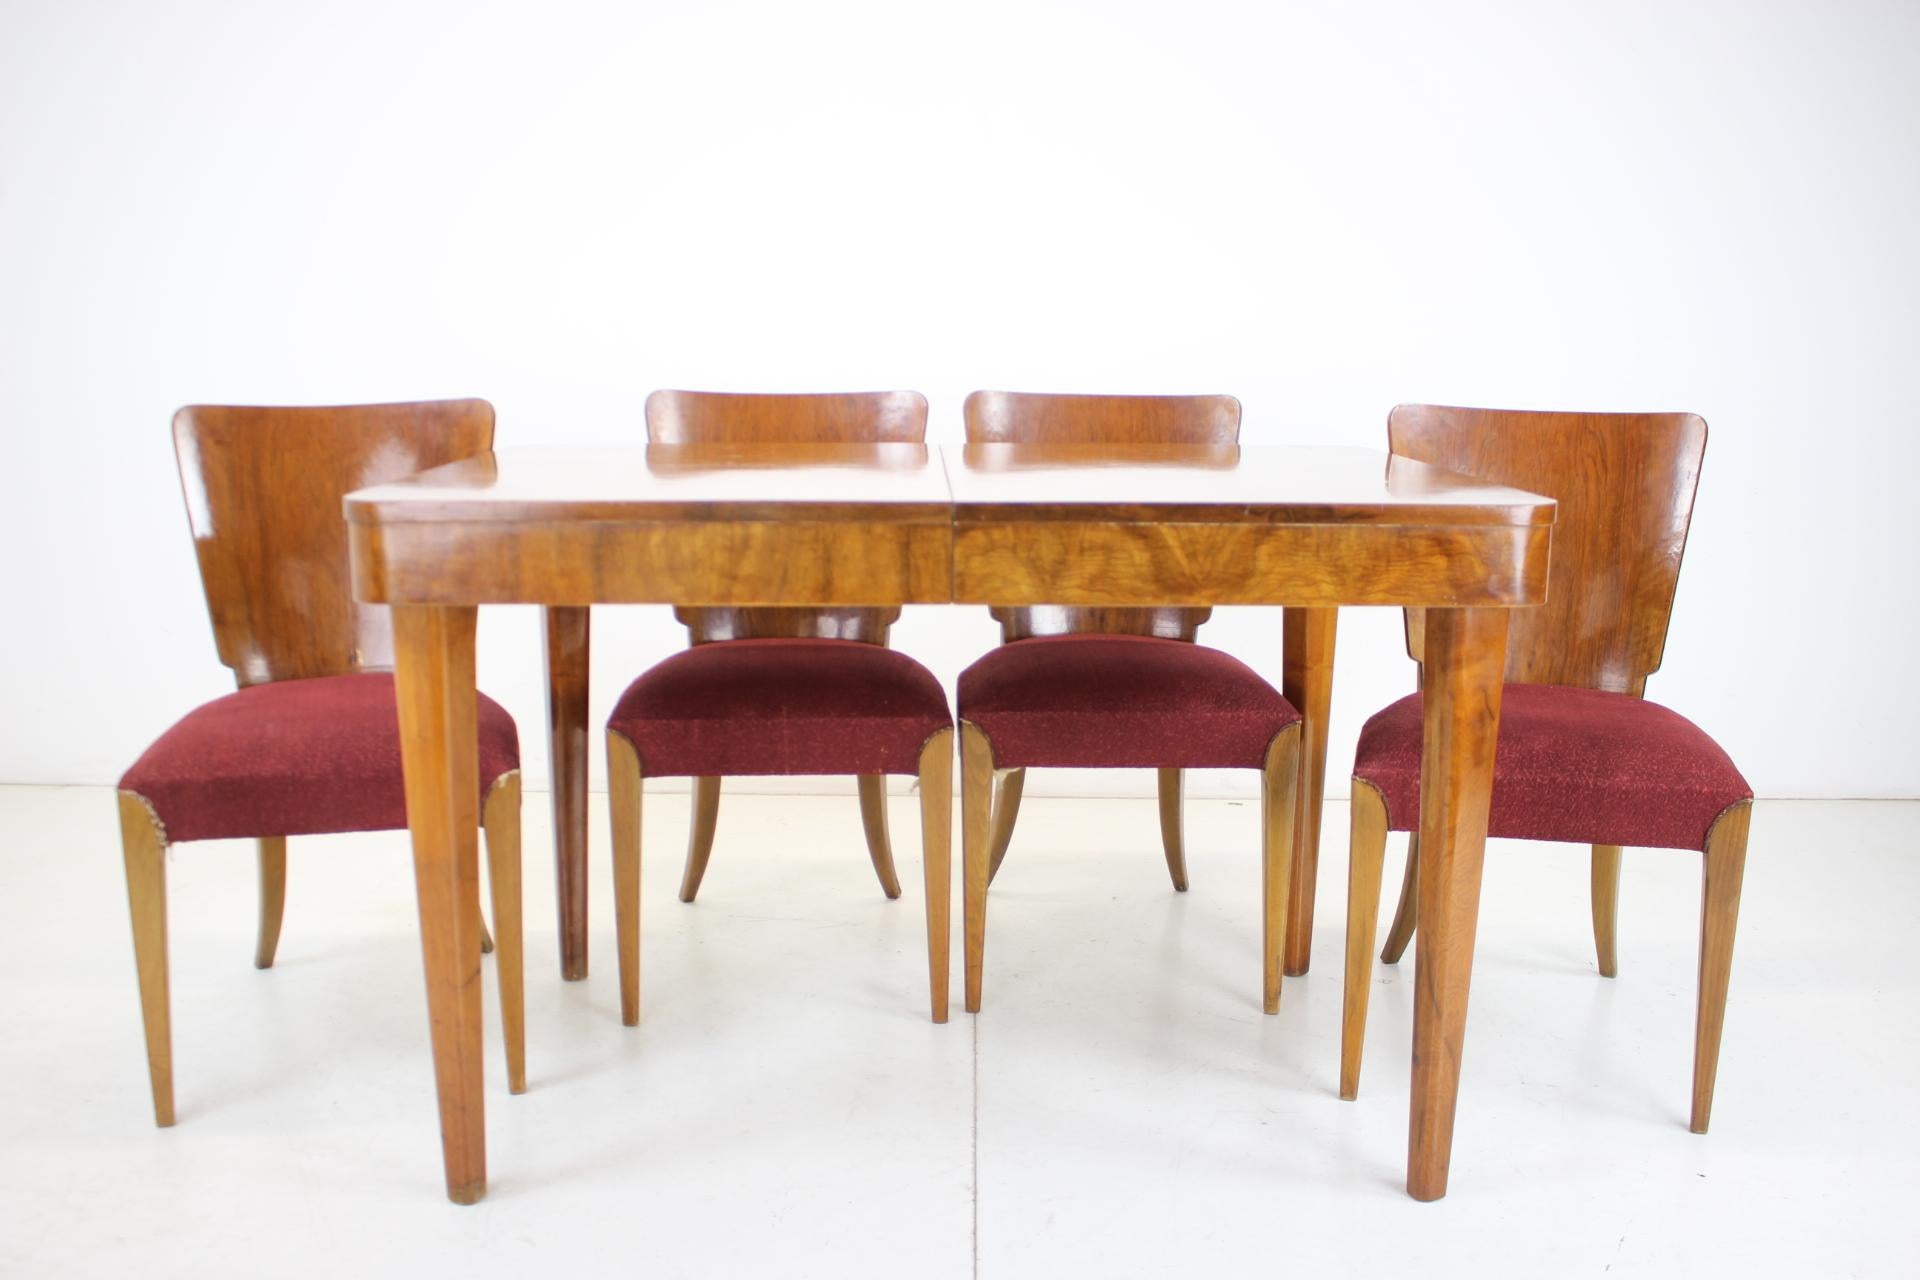 - production date 1957, Walnut dining set by Jindrich Halabala, Czech
- good original condition
- seat height 48 cm
- made of fabric and wood
- wooden parts show signs of use.
- the fabric shows signs of use
- table dimensions: height 76 cm,